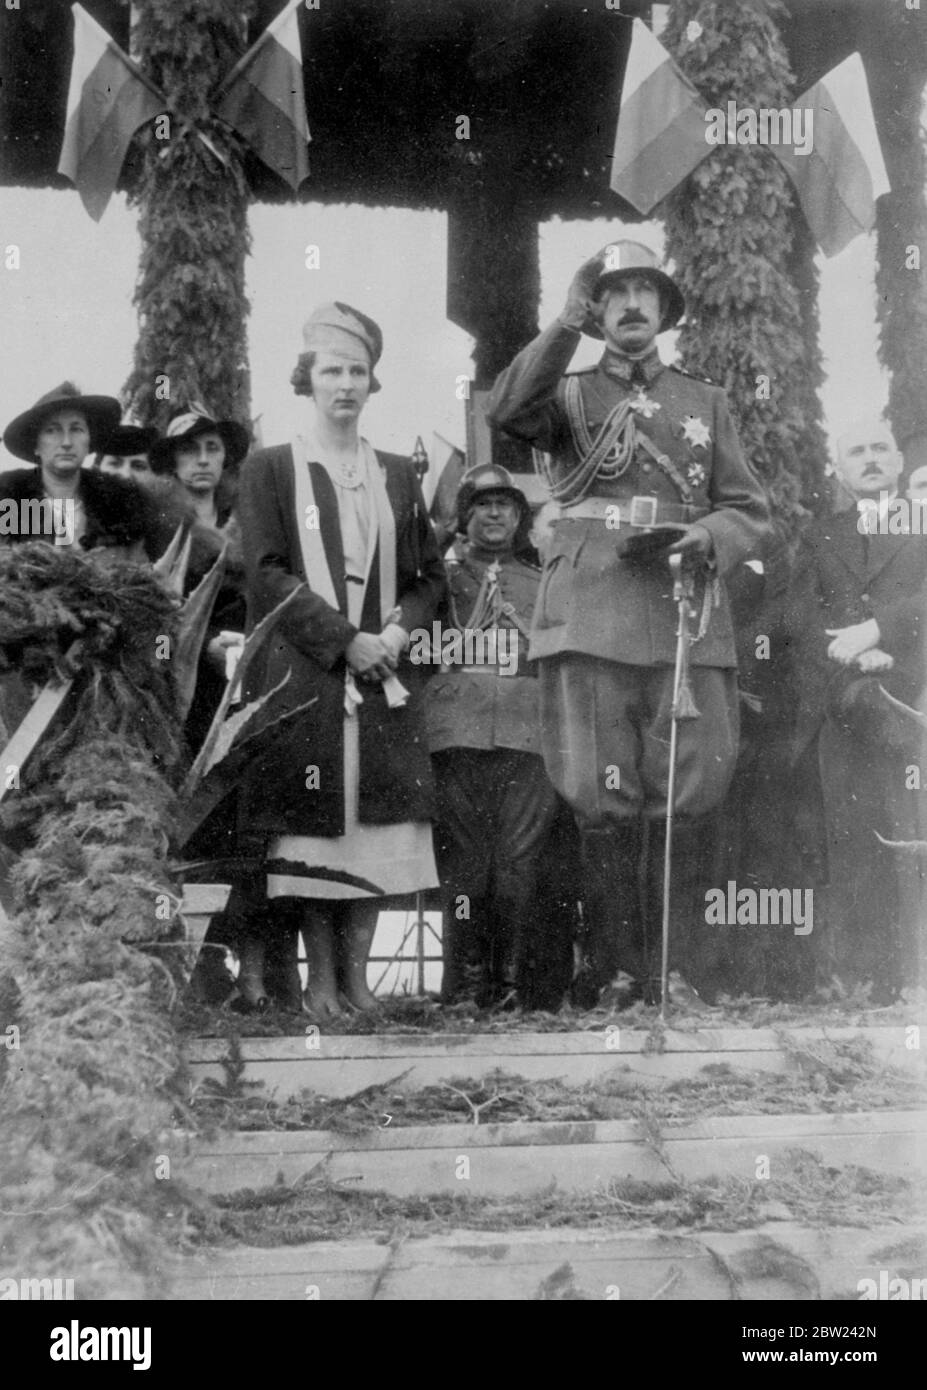 King Boris of Bulgaria, who has been attending the manoeuvres of the Bulgarian army, was accompanied by Queen Joanne when he took the salute at a military parade in celebration of the 20th anniversary of the Kings's accession. Photo shows: King Boris, in steel helmet, and Queen Joanna taking the salute at the parade. 6 October 1938 Stock Photo